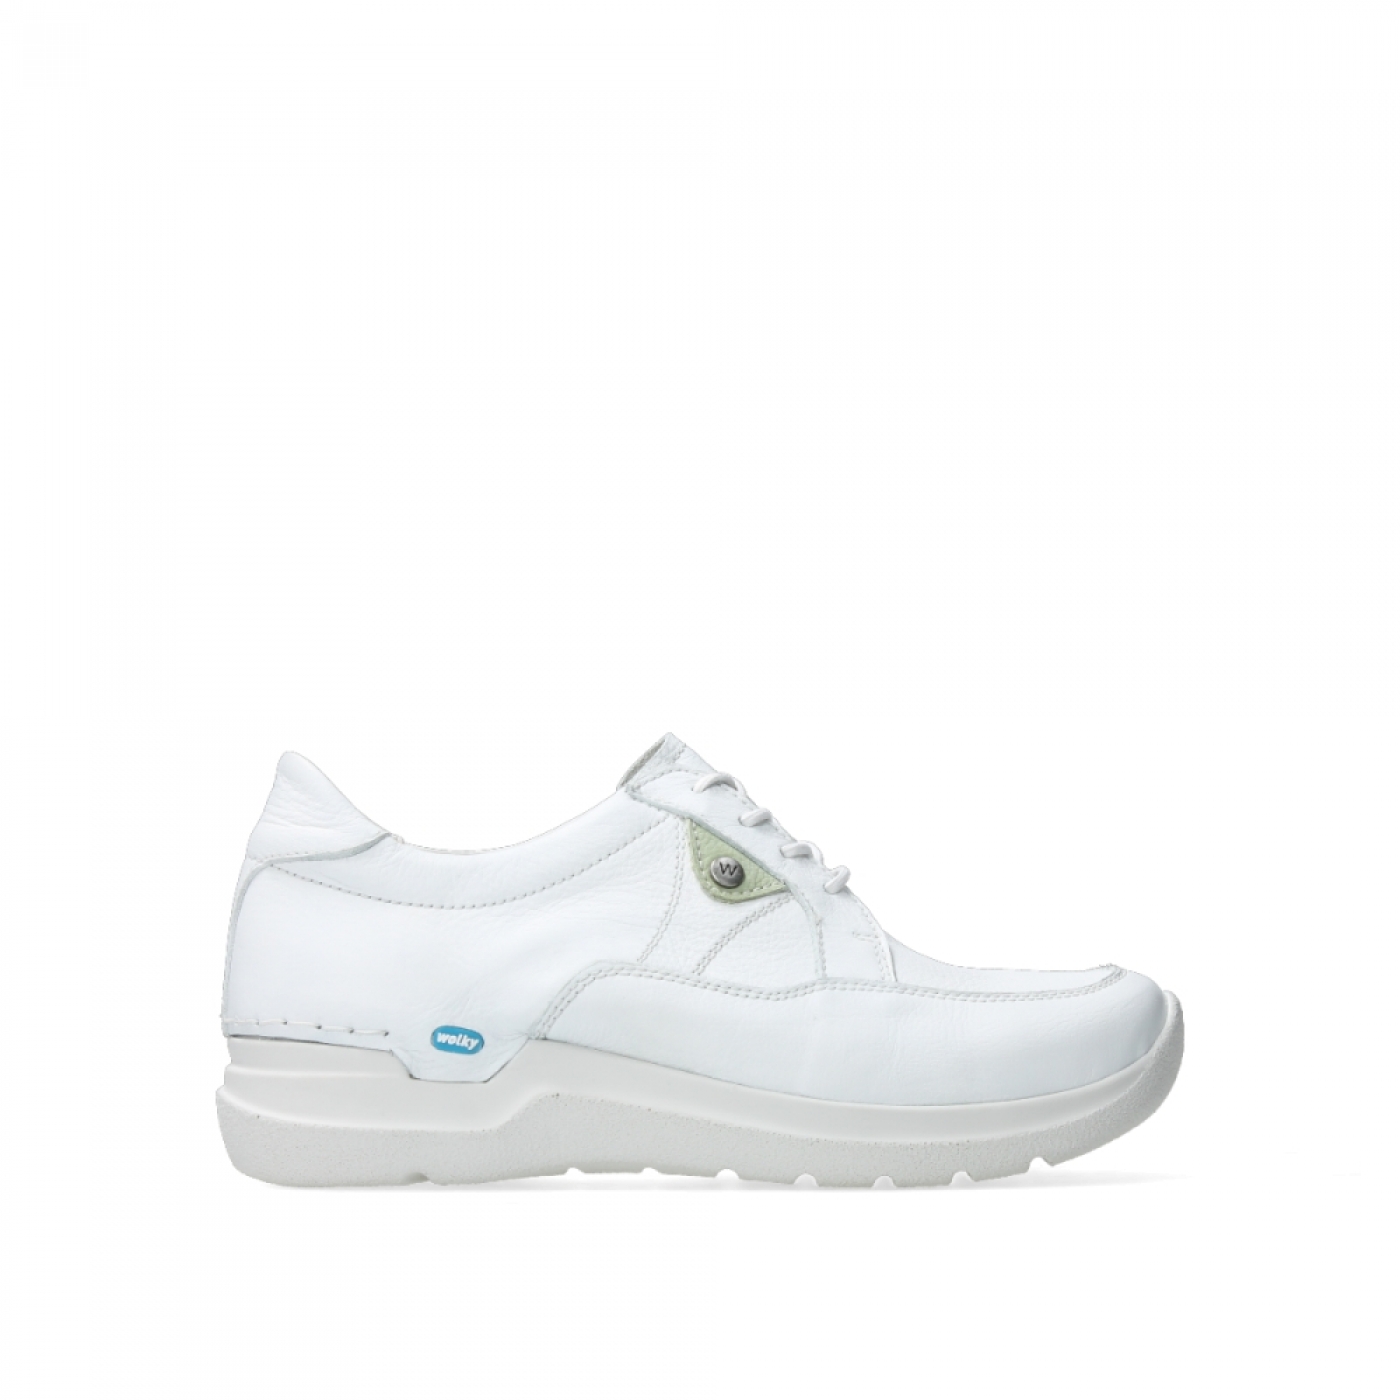 Relatief Post impressionisme Boven hoofd en schouder Wolky Shoes 06622 Drummer white/light green leather order now! Biggest  Wolky Collection| Wolkyshop.com